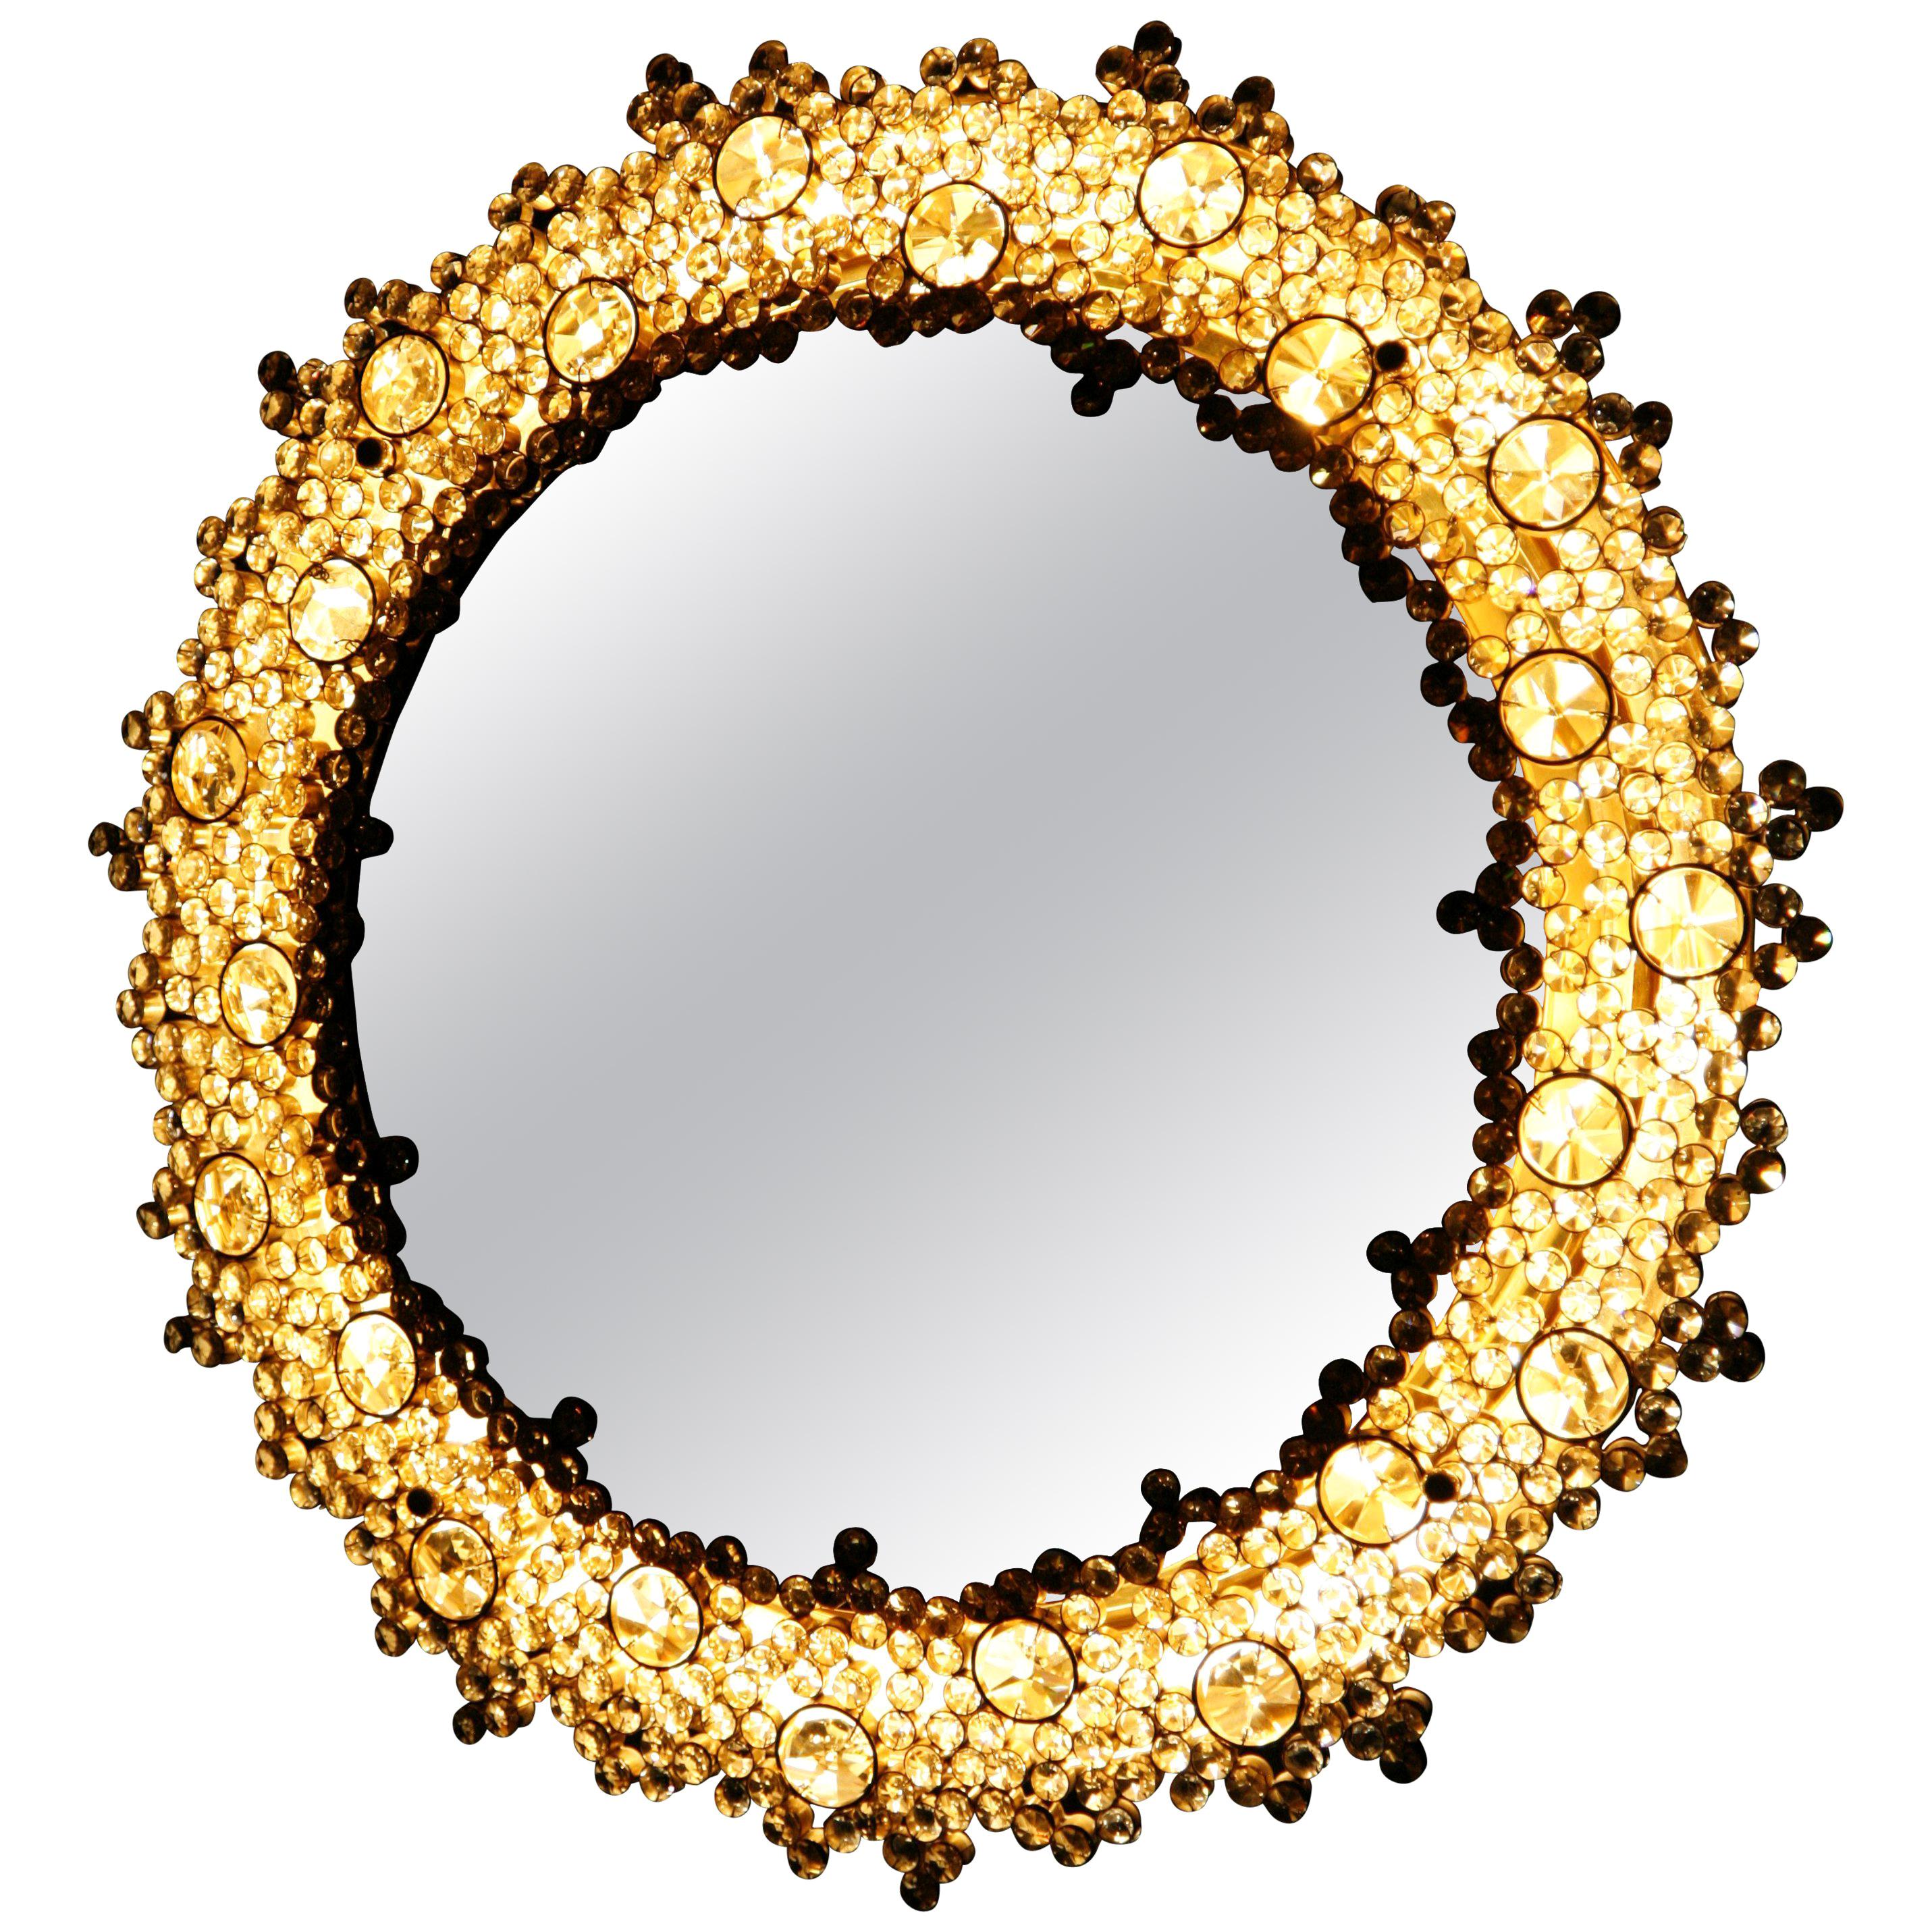 Sunburst mirror surrounded by a gold gilded frame that has numerous cut crystals in various sizes by Swarovski crystals Austria, it lights up the room like a fireplace it is the centerpiece for any room in the house.
The throughout detailed work